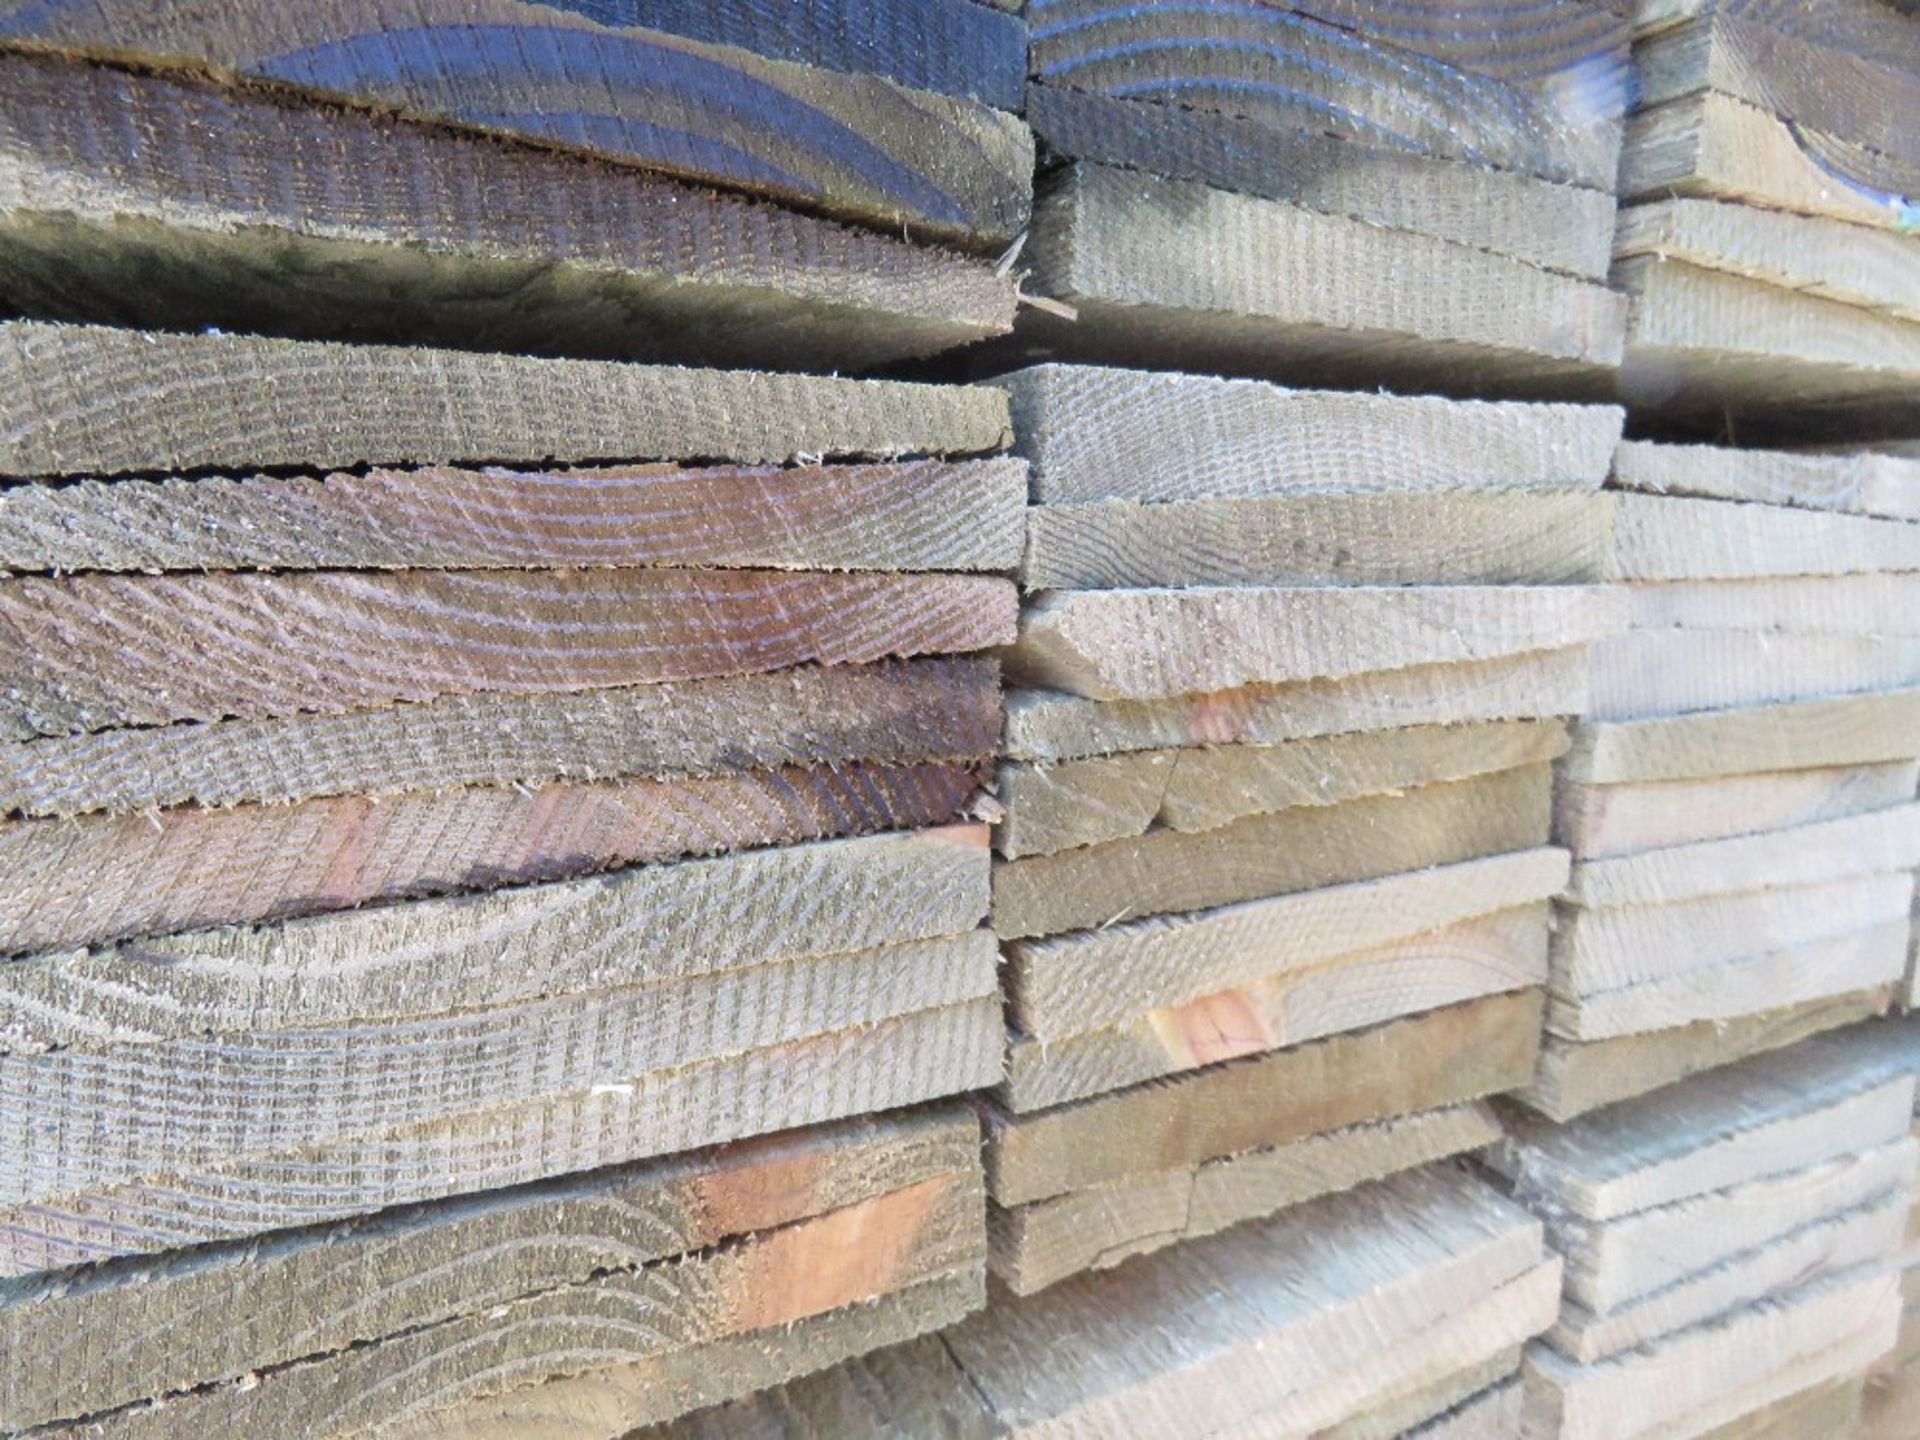 LARGE PACK OF PRESSURE TREATED FEATHER EDGE CLADDING TIMBER BOARDS 1.5M LENGTH X 100MM WIDTH APPROX. - Image 3 of 3